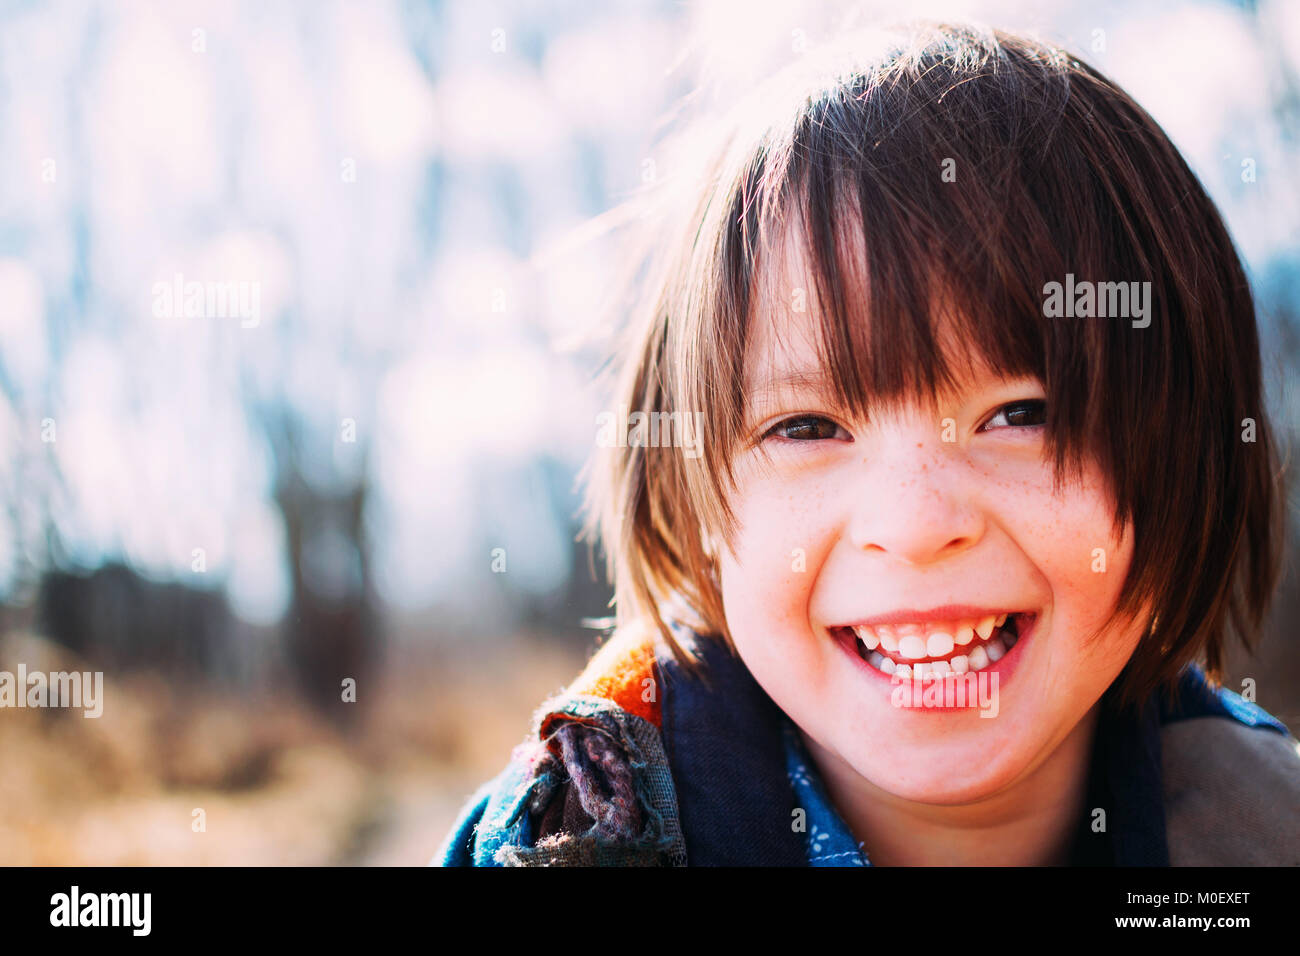 Portrait of a smiling girl Stock Photo